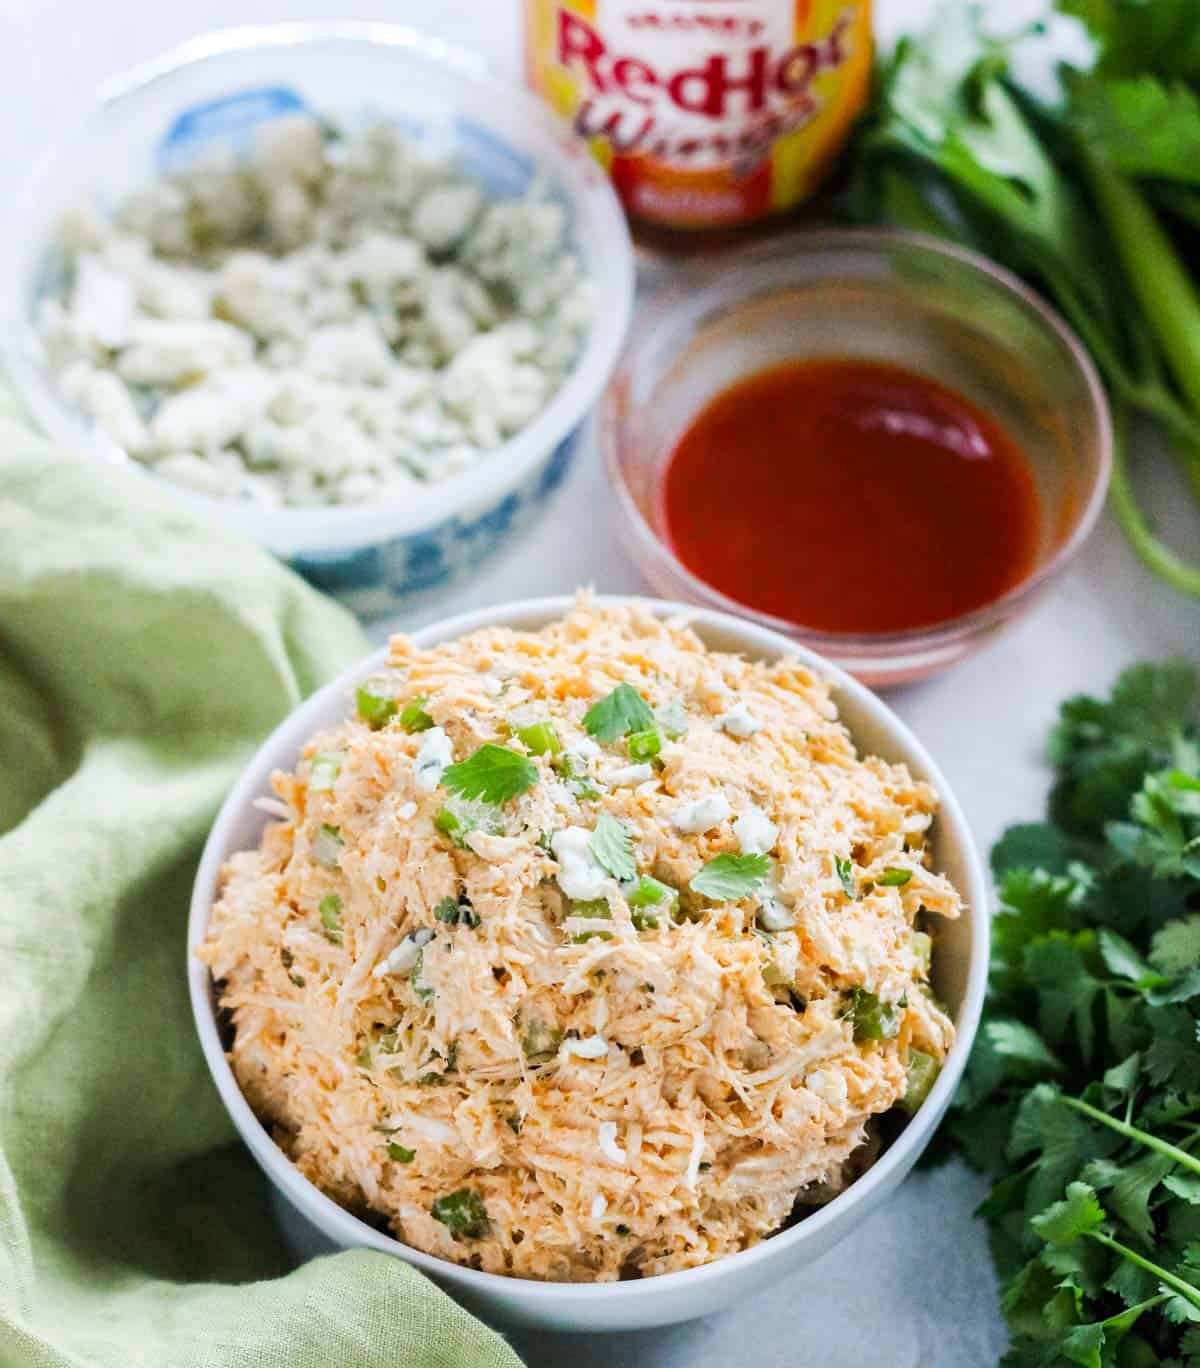 white bowl with buffalo chicken salad surrounded by a green napkin, fresh cilantro, bowl of buffalo sauce, bottle of sauce, and container of blue cheese crumbles.